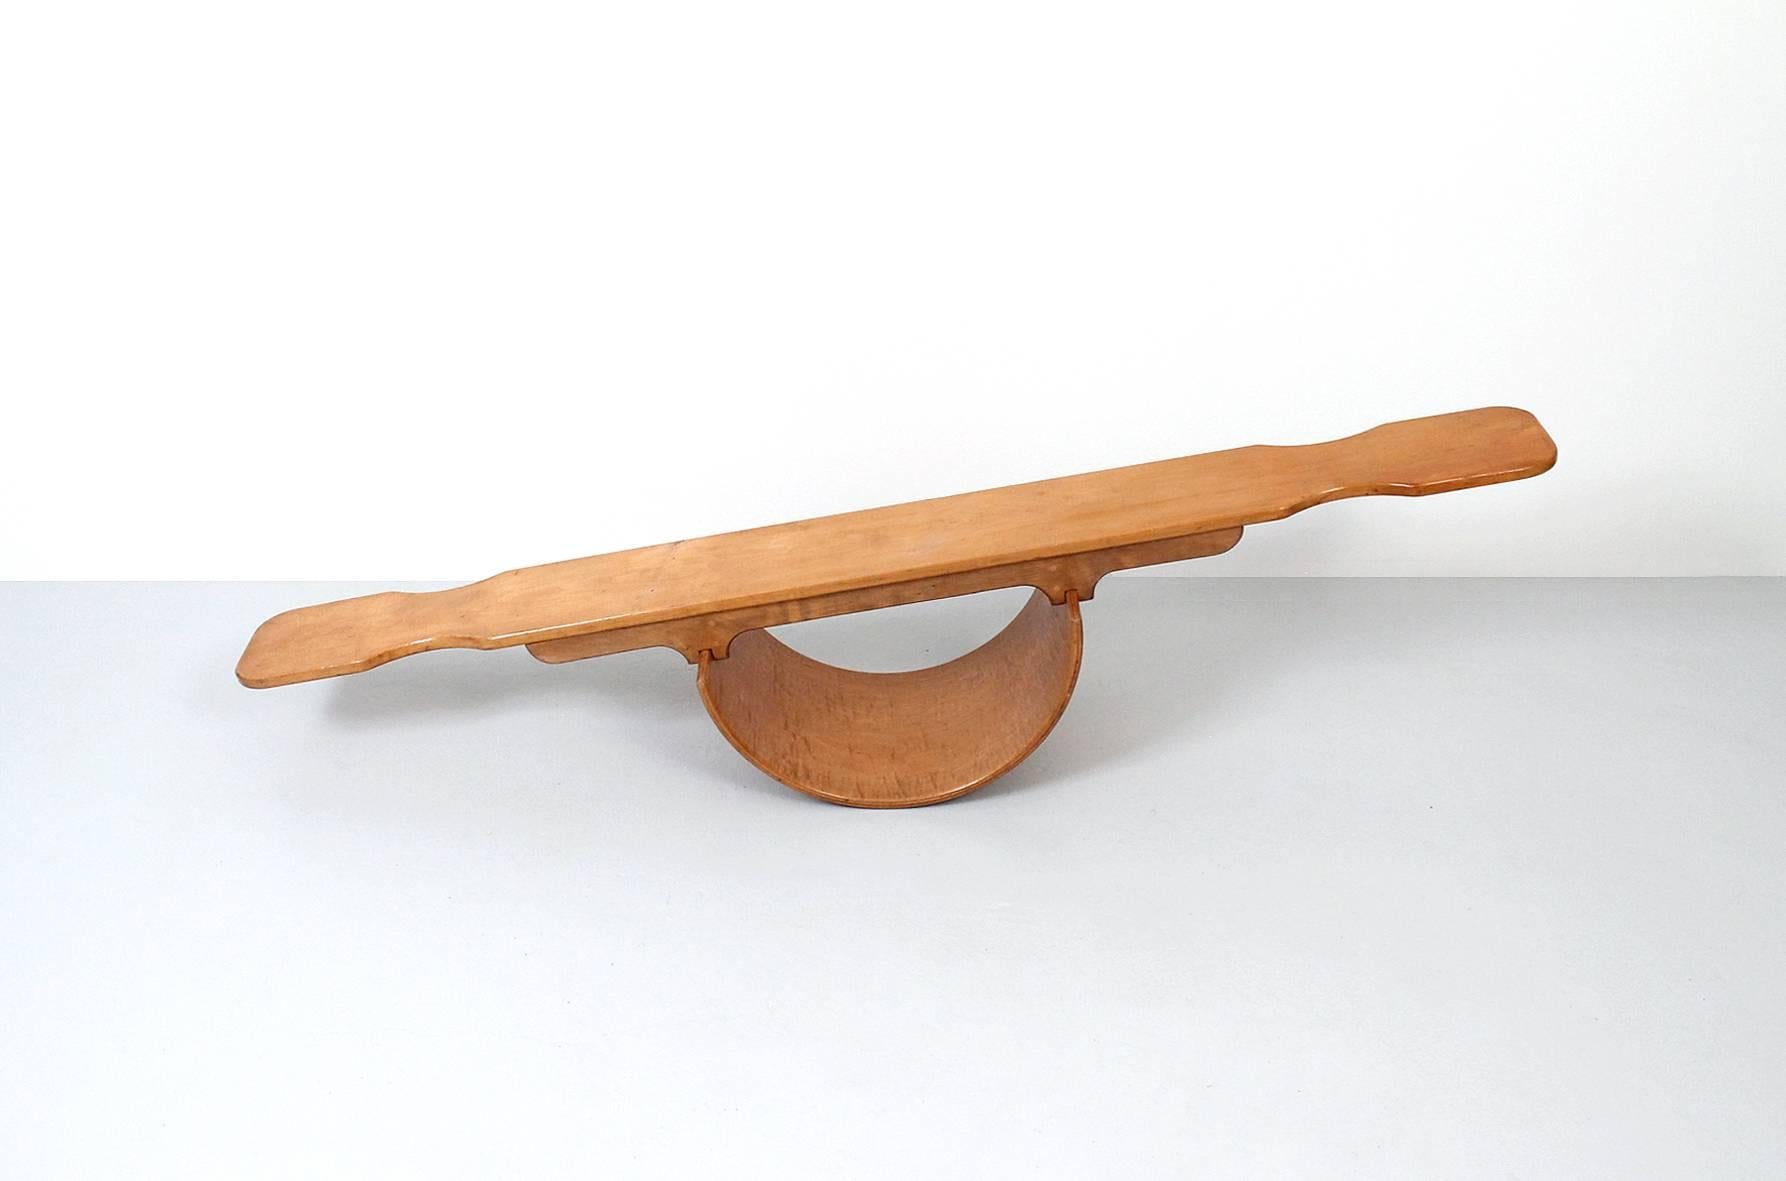 Bentwood Modernist child's seesaw from the 1950s.  Attributed to Creative Playthings.  Graphic and fun sculptural form.